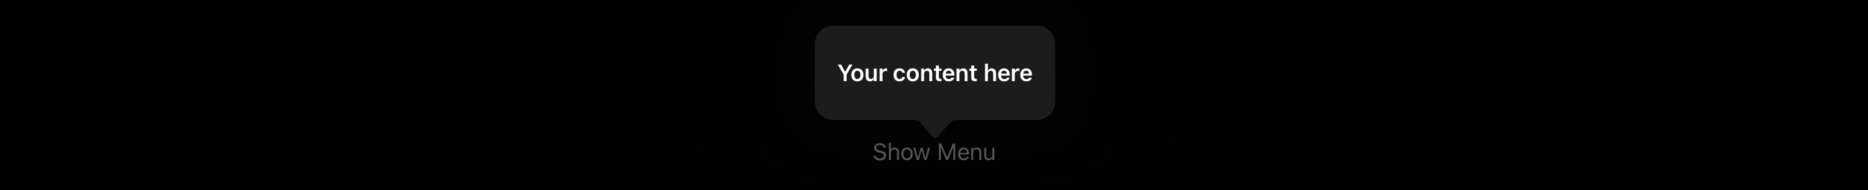 A button reading “Show Menu” has been pressed. Above it is a white speech balloon containing “Your content here”.